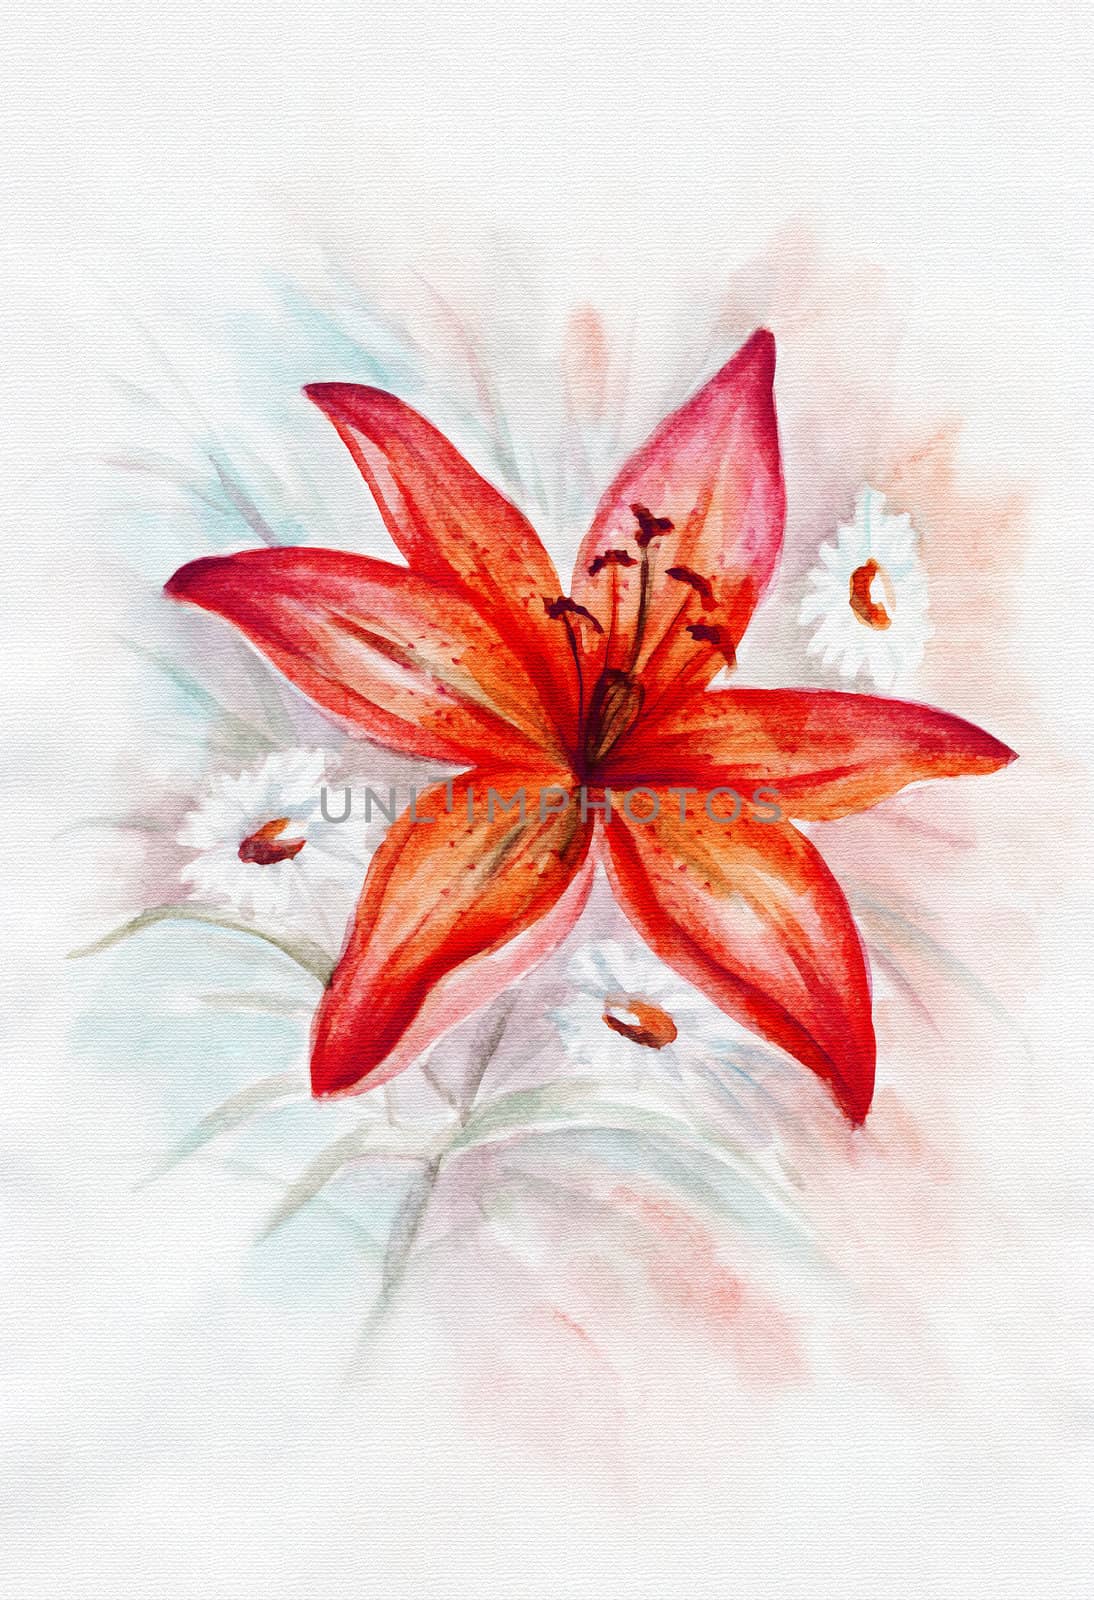 Red lily and camomiles, picture oil paints on a canvas